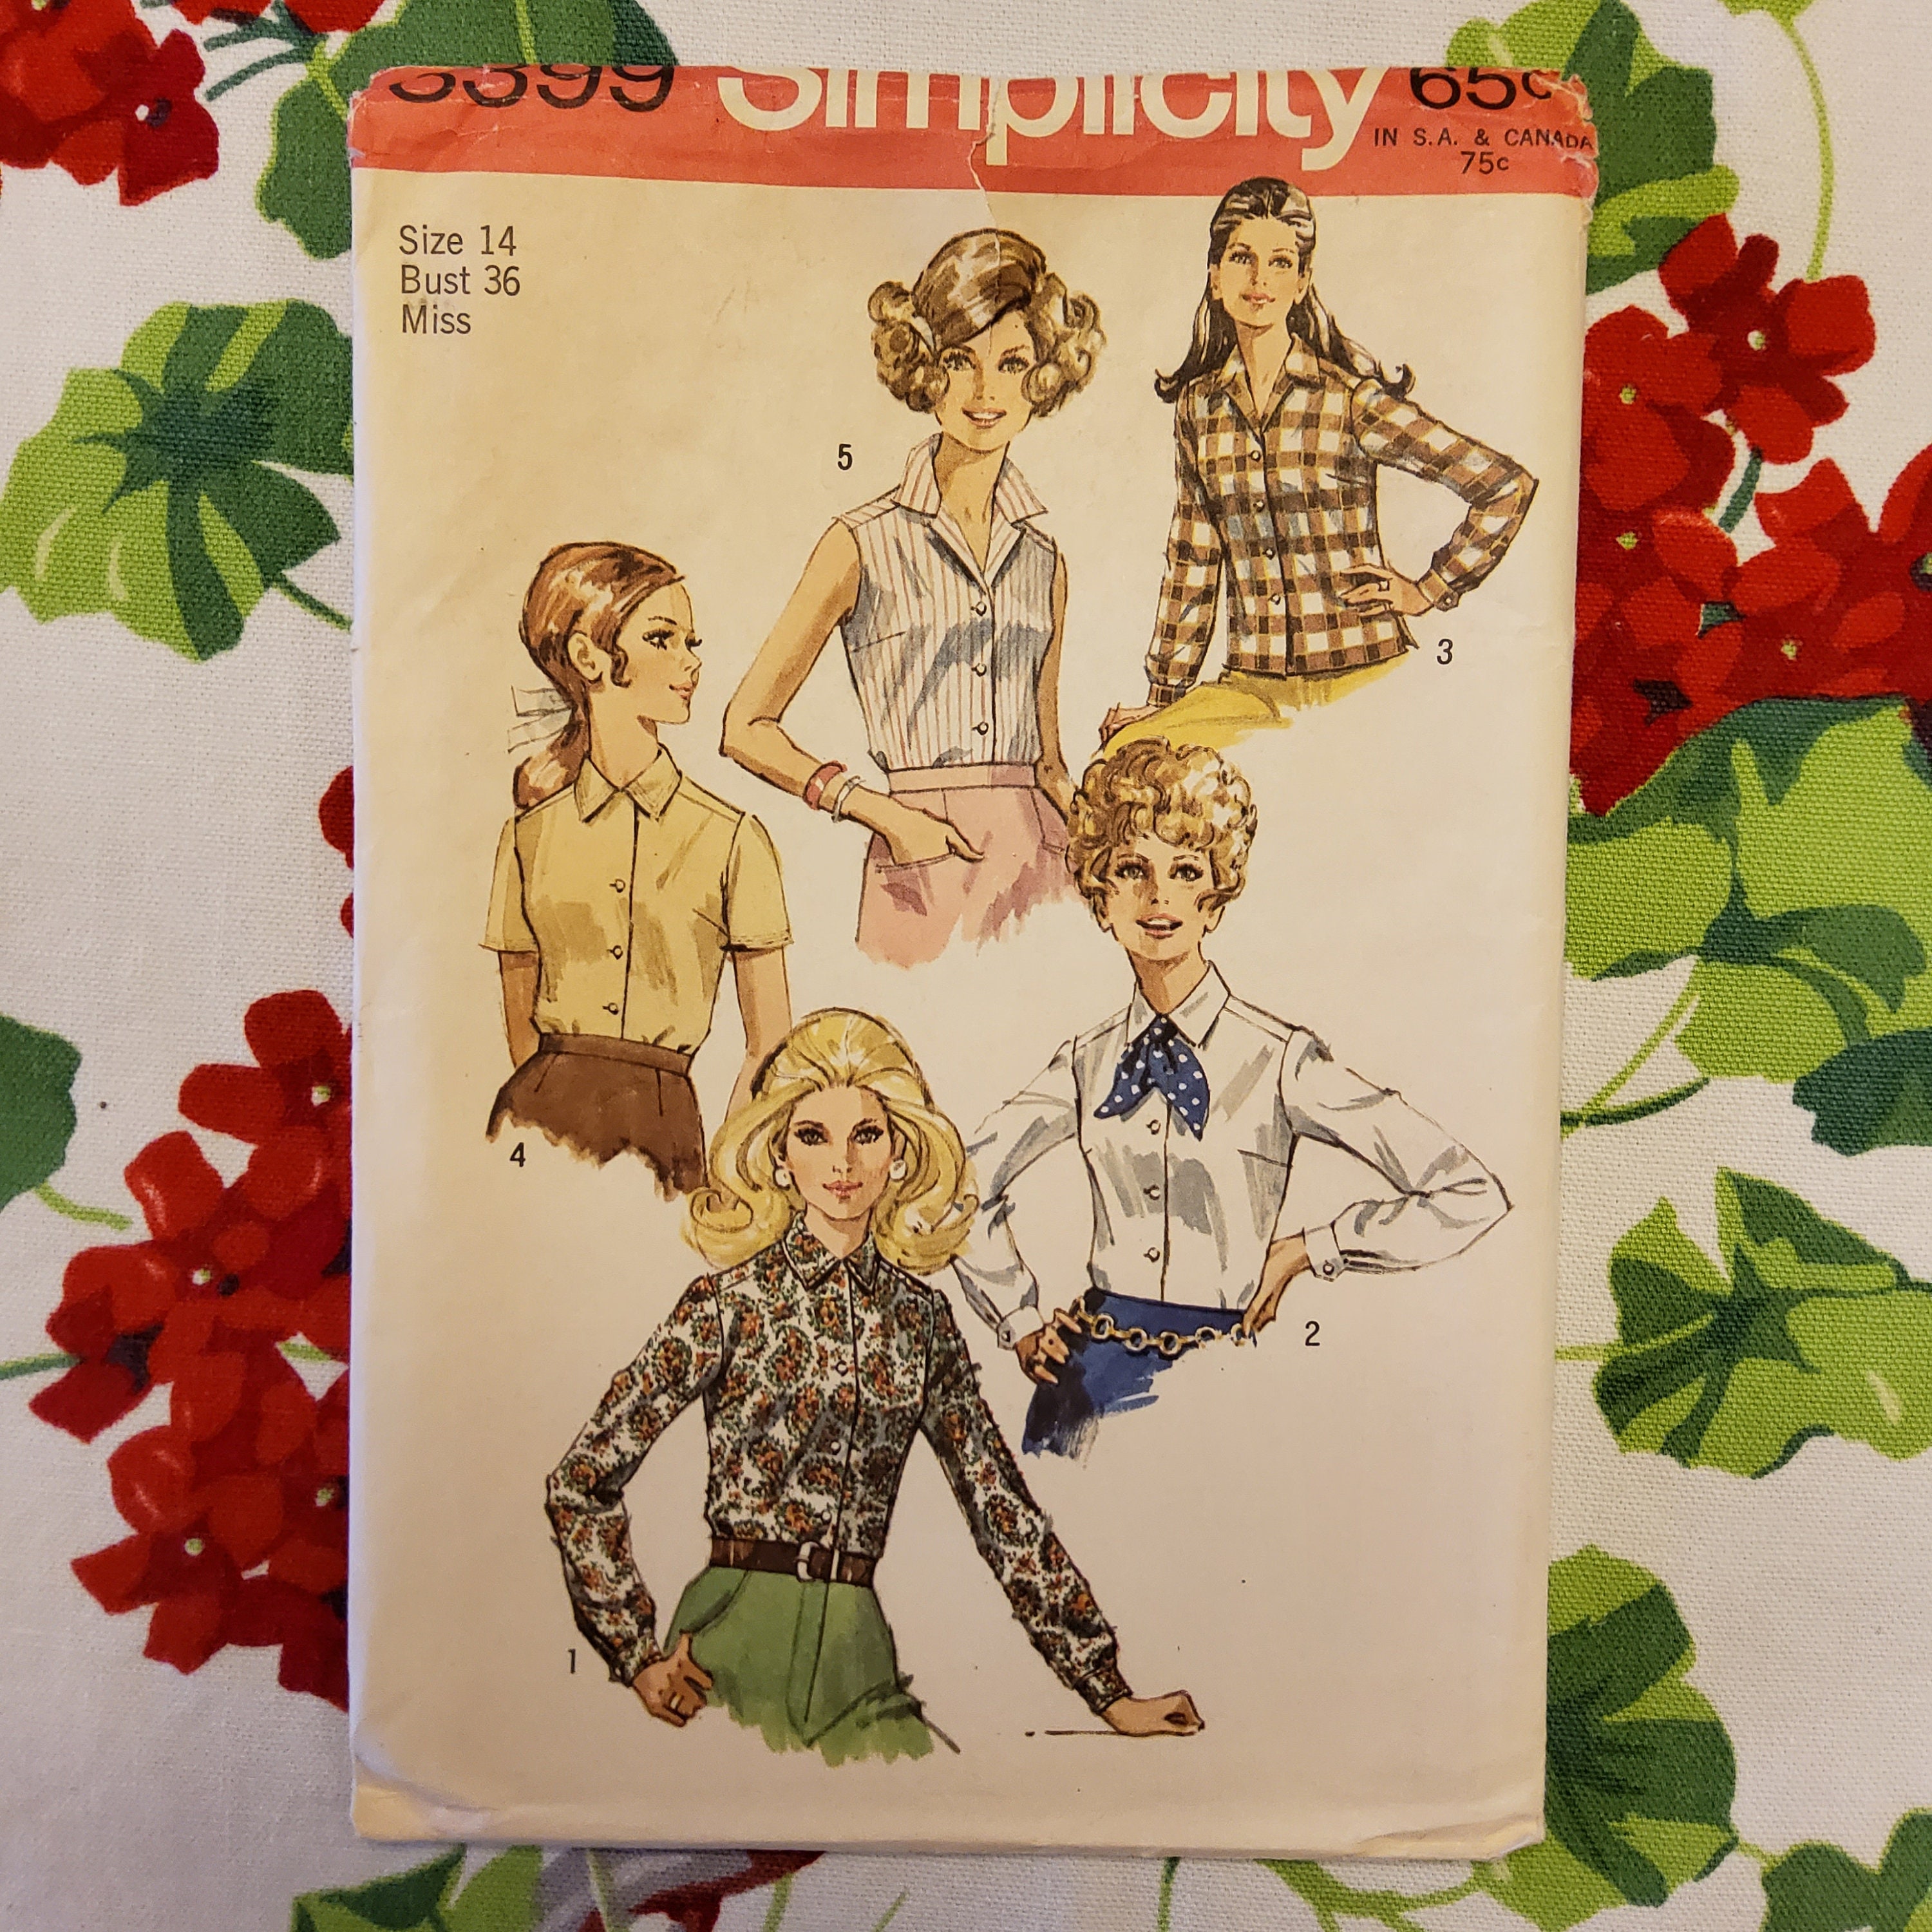 Simplicity 8399 vintage 1960s blouses sewing pattern Bust 36